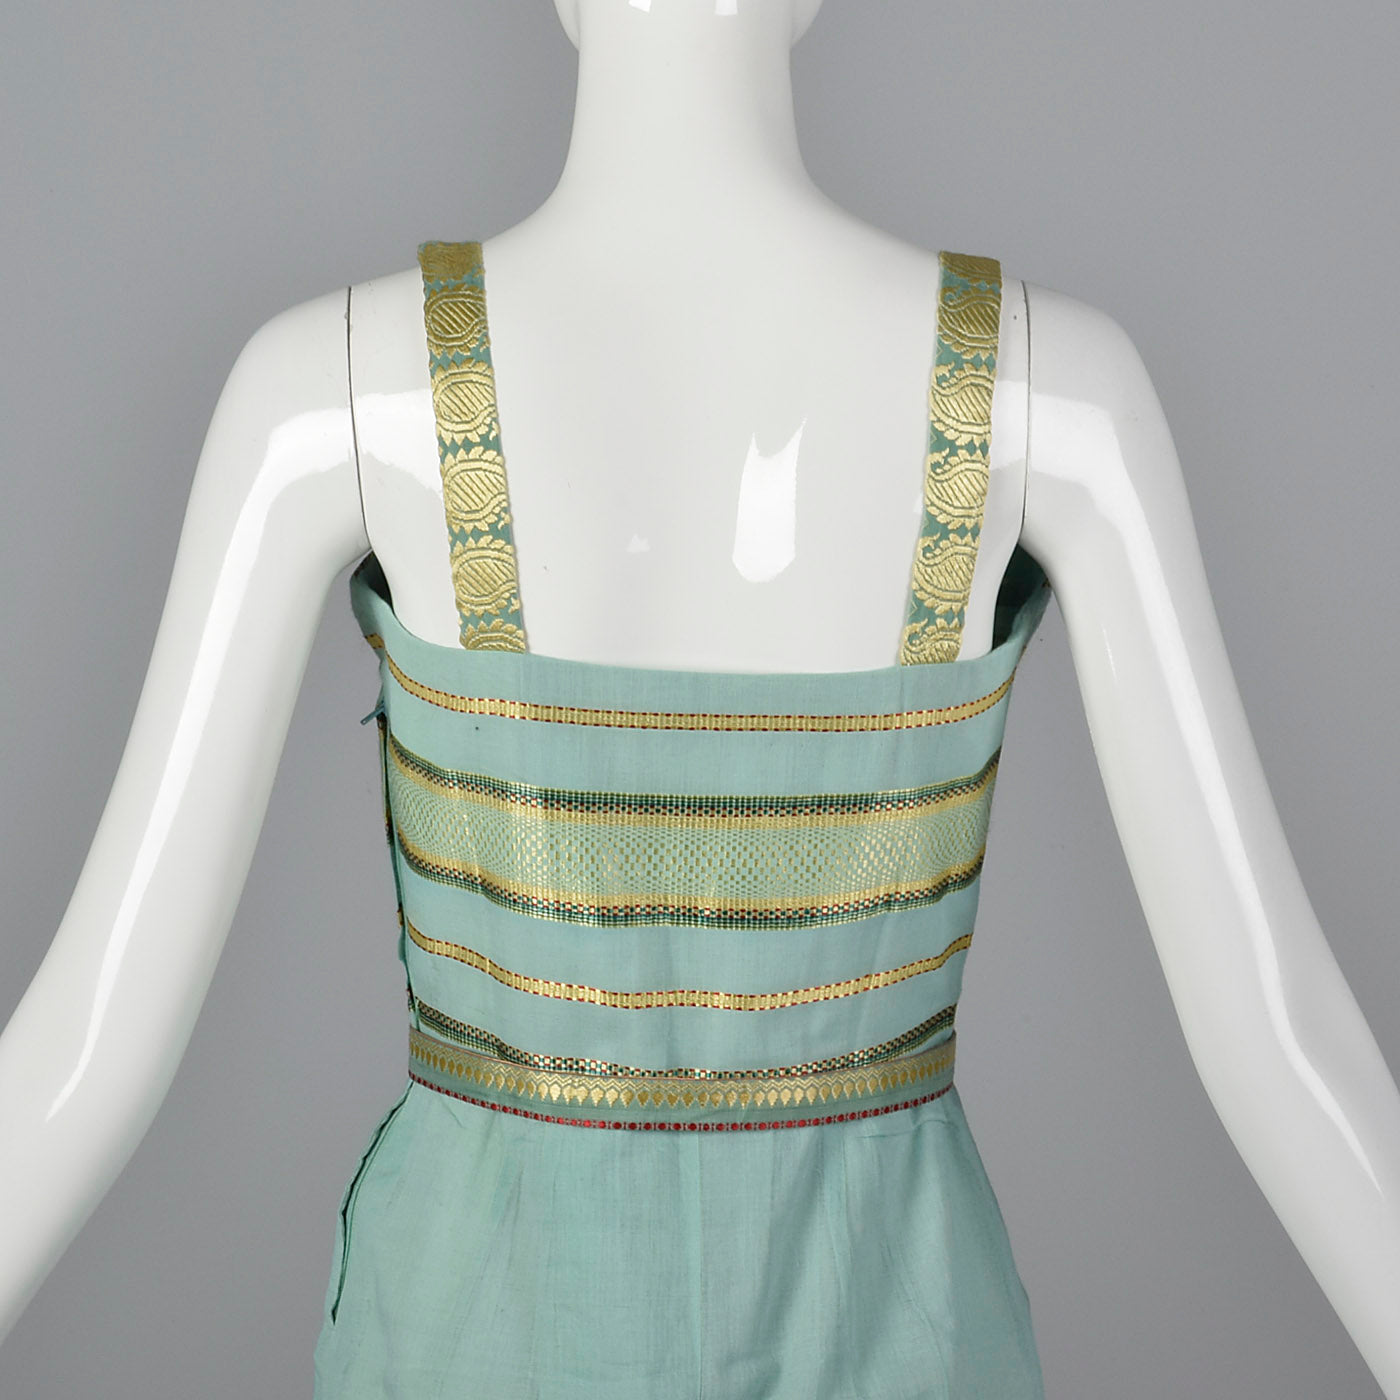 1950s Dress and Jacket Set in Aqua with Gold Trim